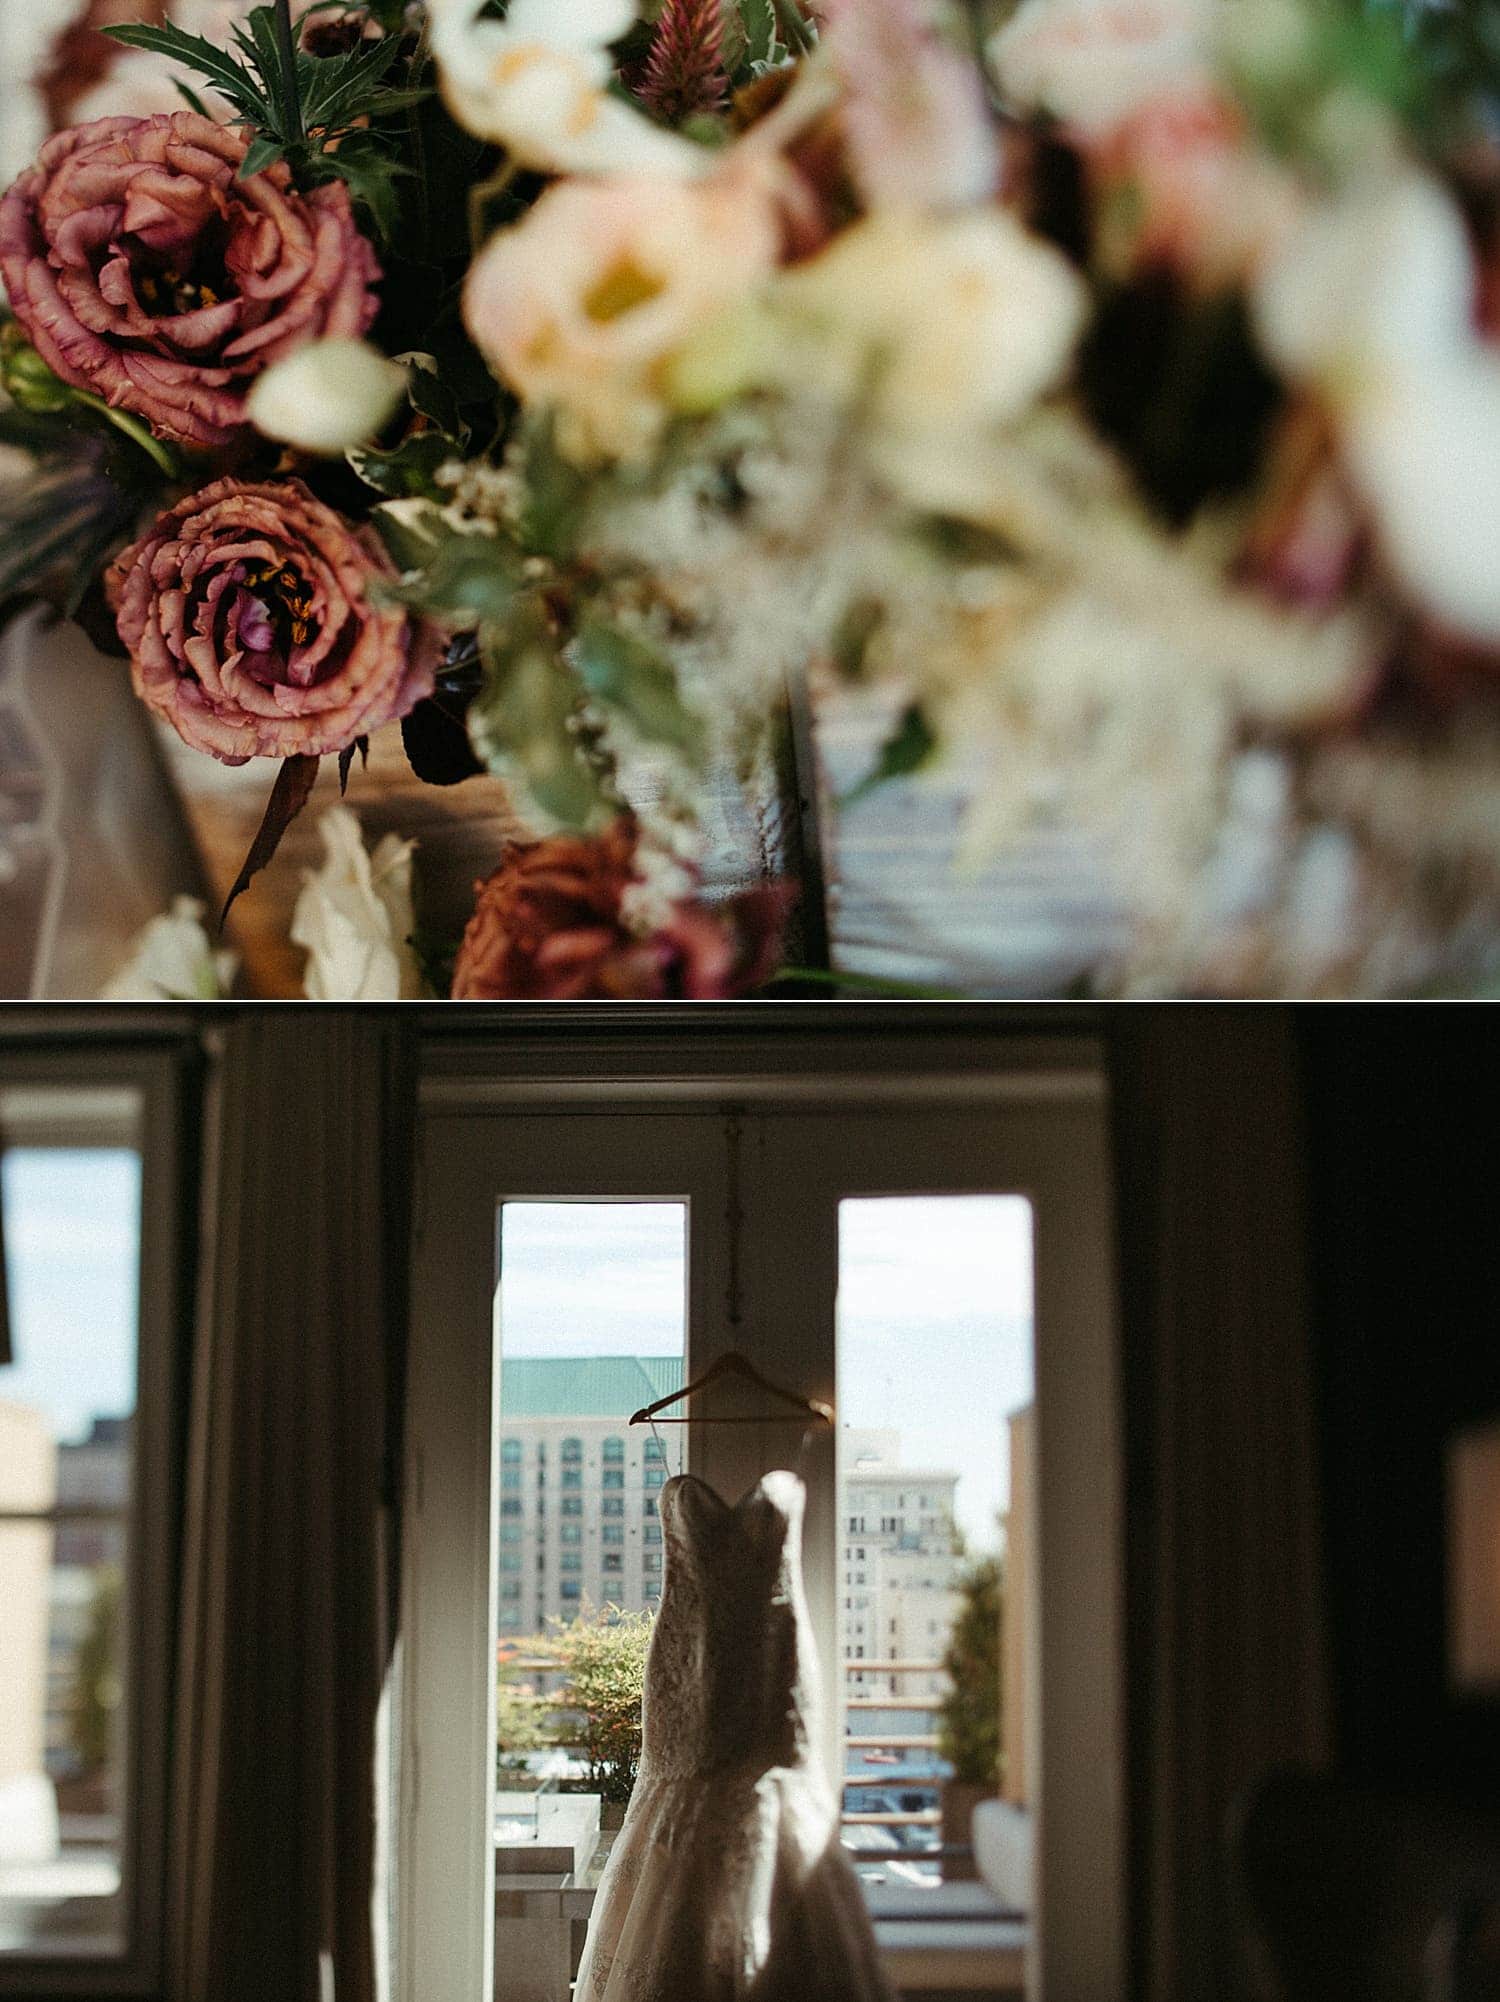 brides wedding dress hanging on the window of the sentinel hotel and her bouquet of flowers by marcela pulido photography portland wedding photographer